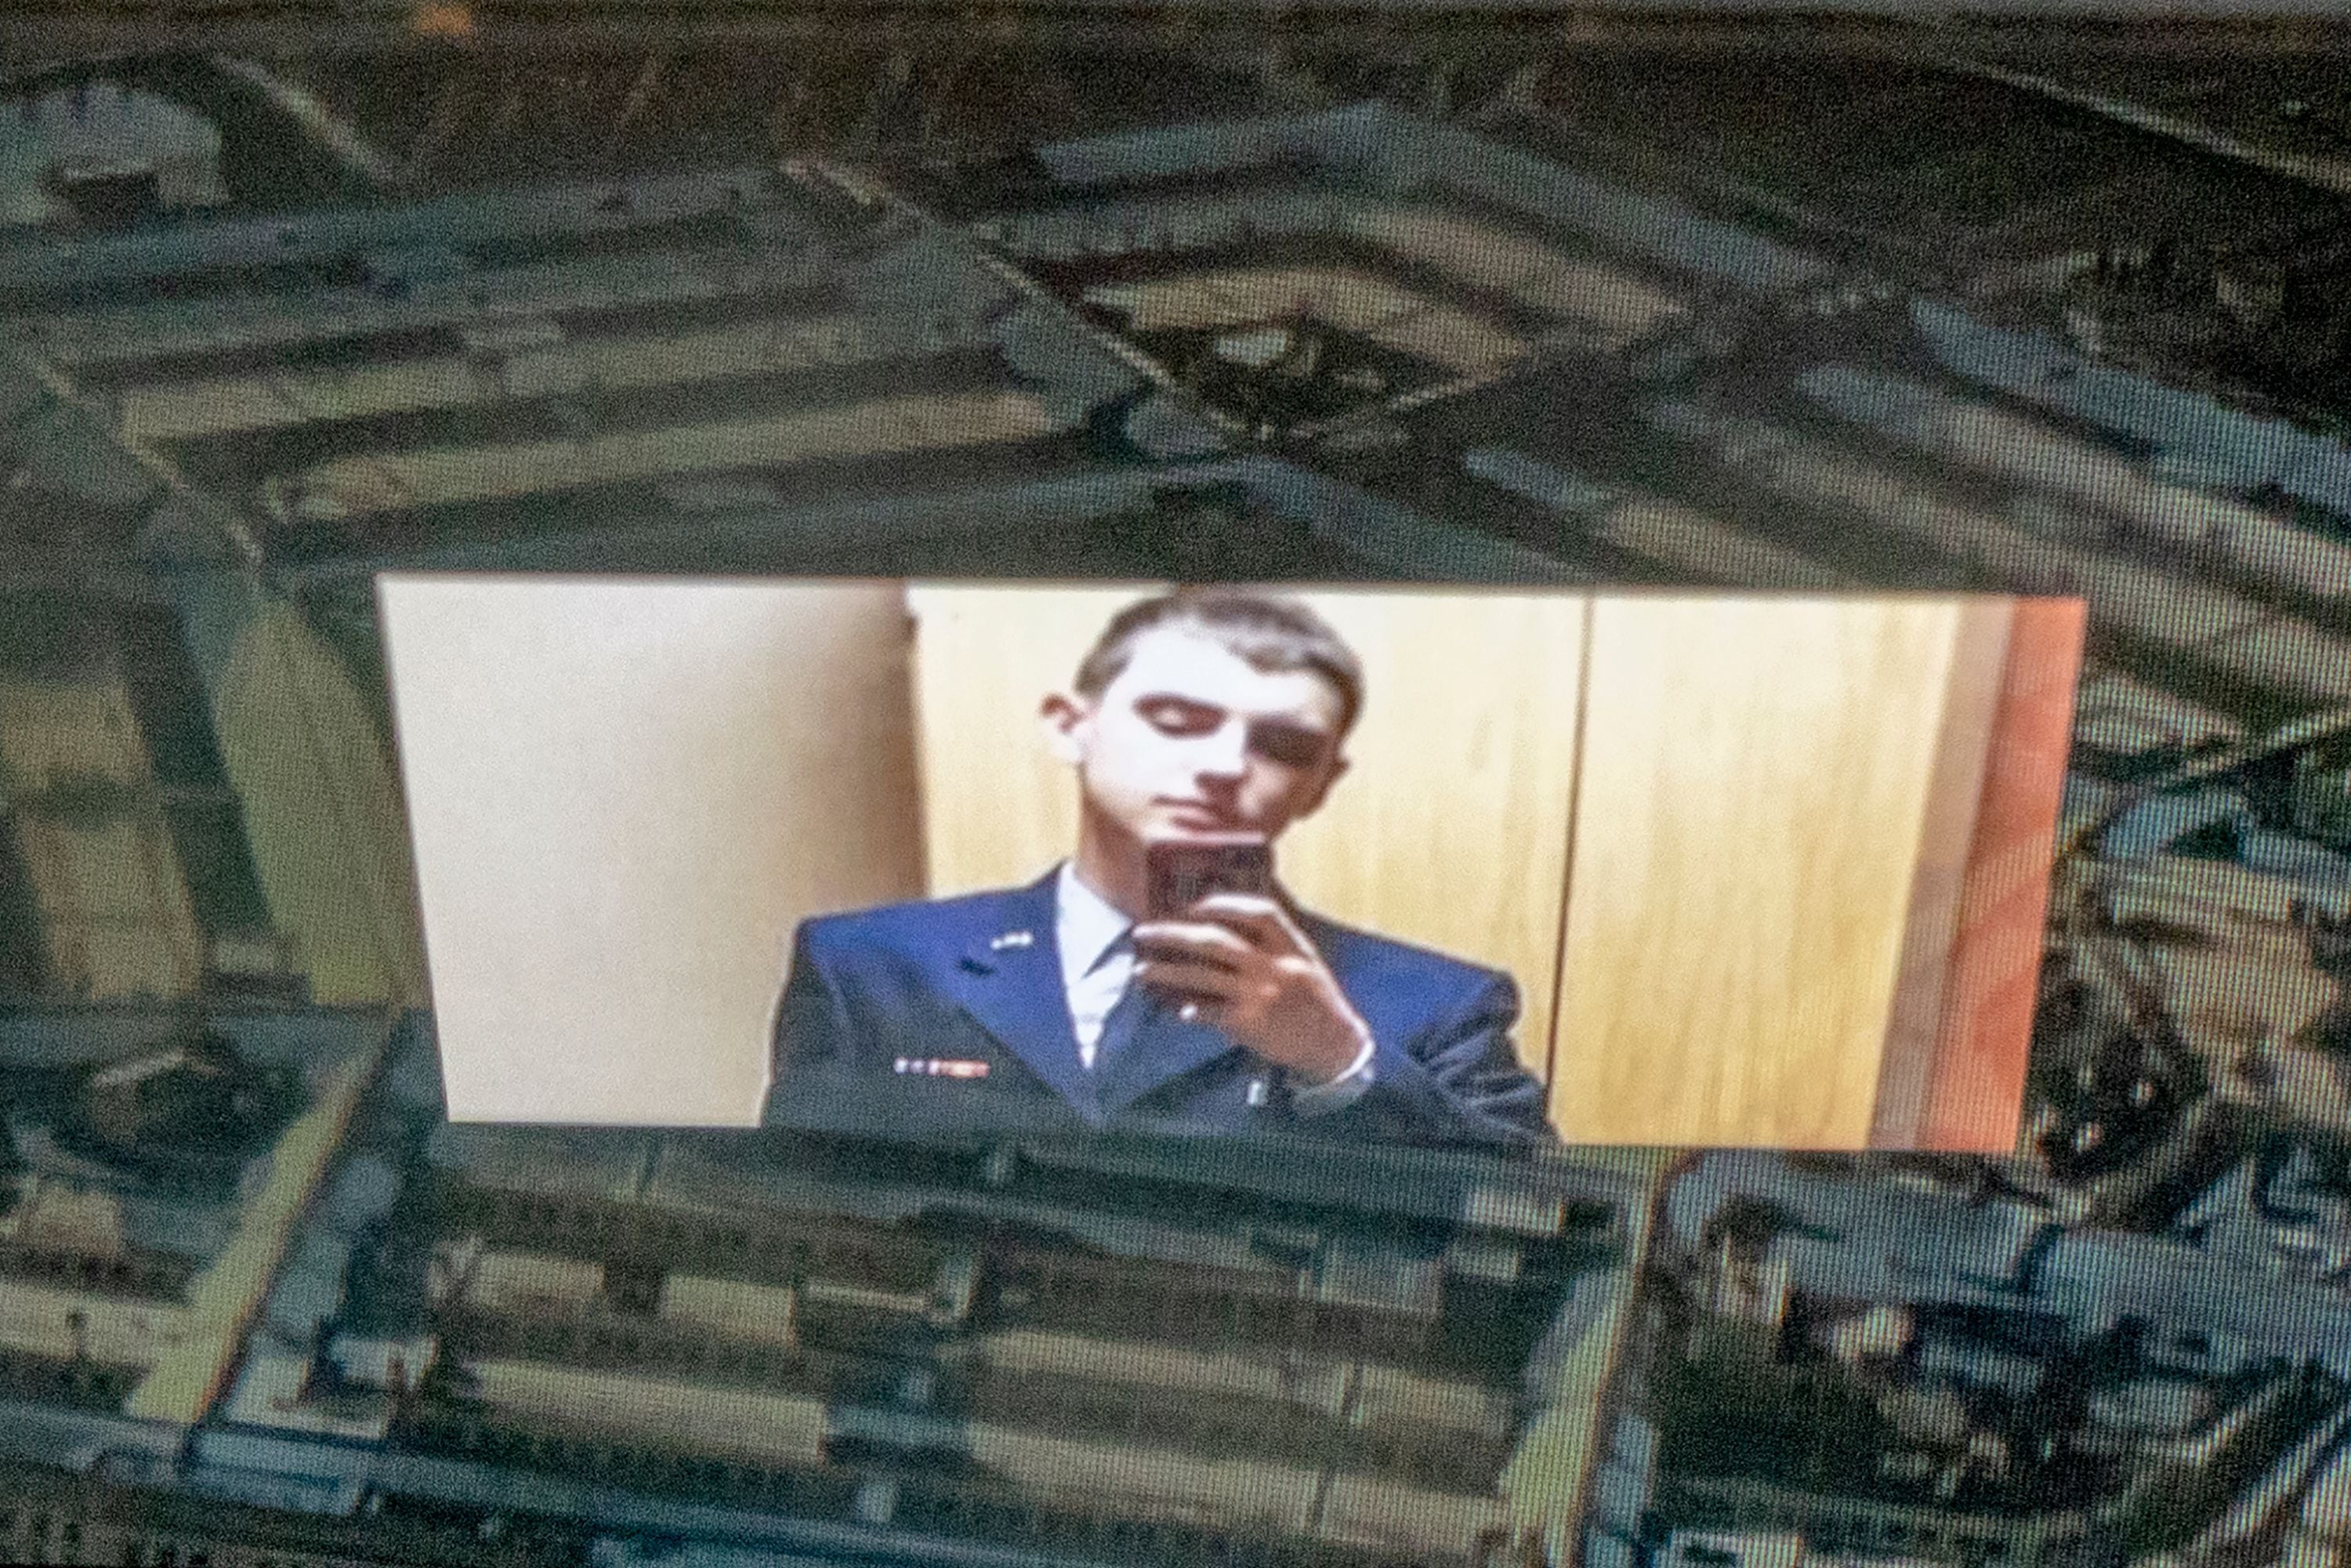 This photo illustration shows the suspect, national guardsman Jack Teixeira, reflected in an image of the Pentagon